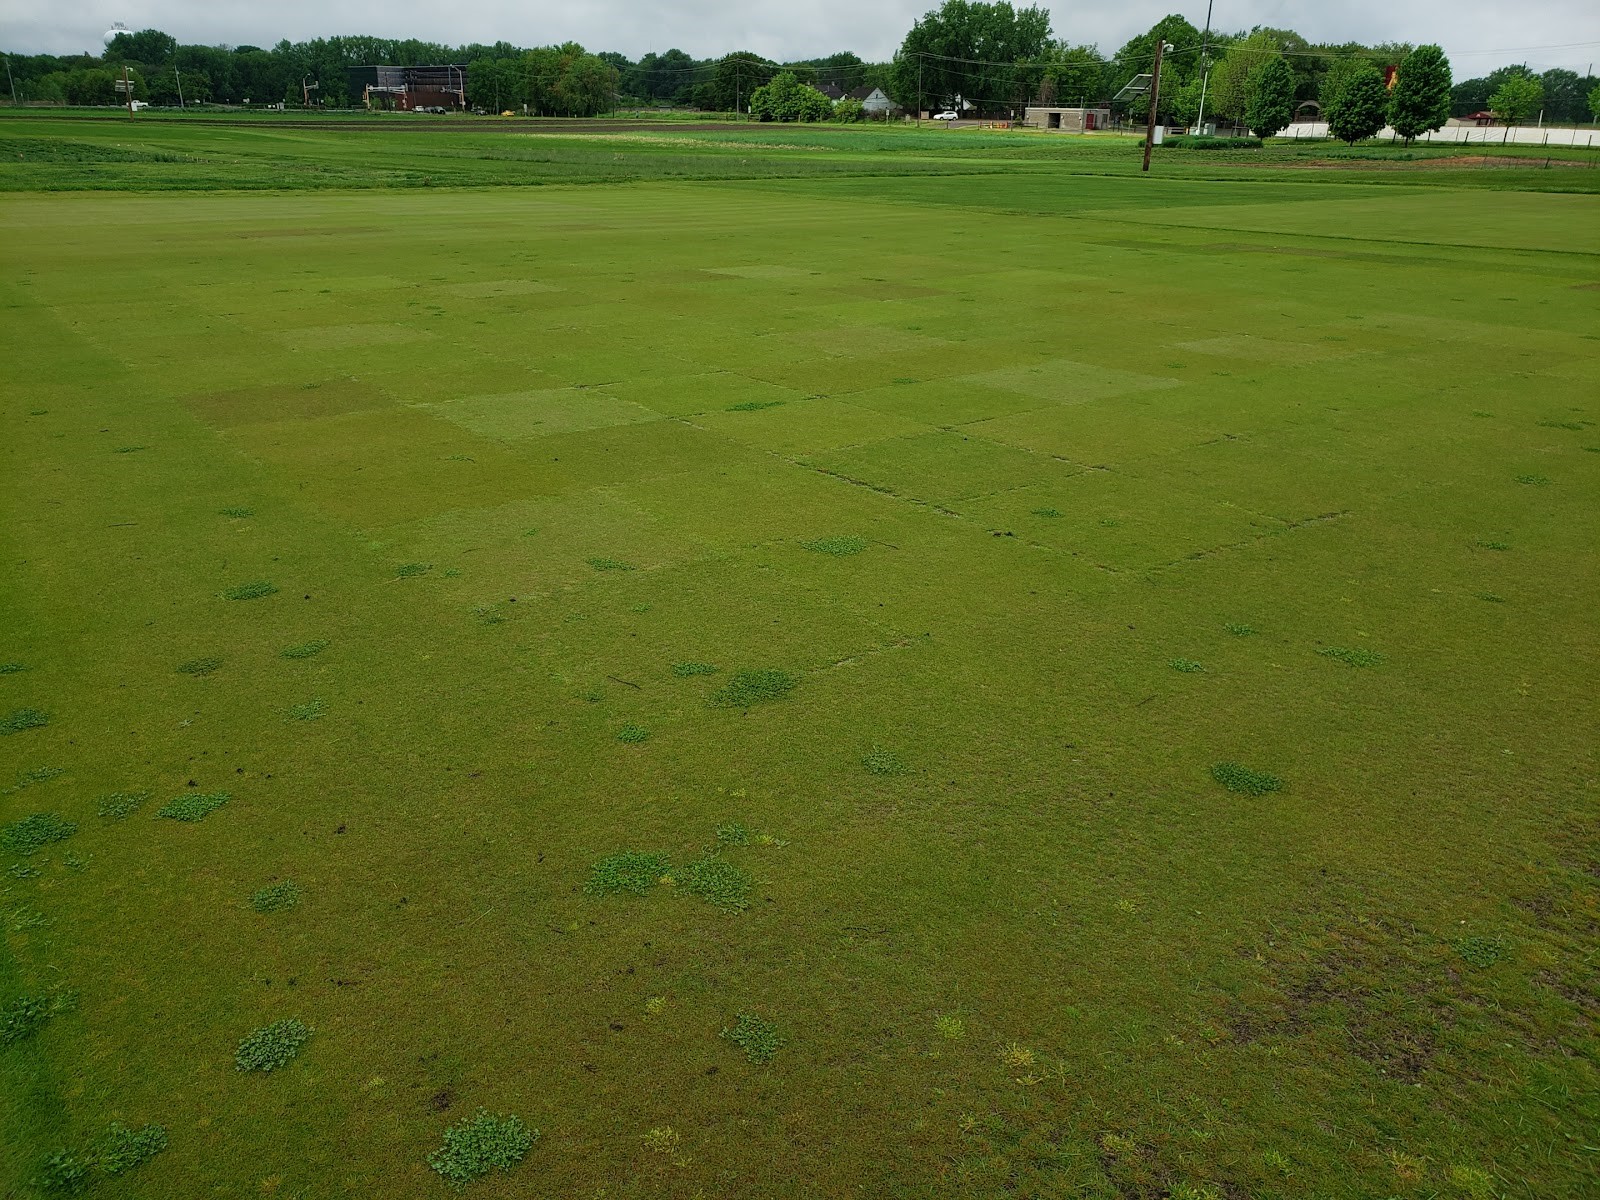 Putting green research plots at the University of Minnesota